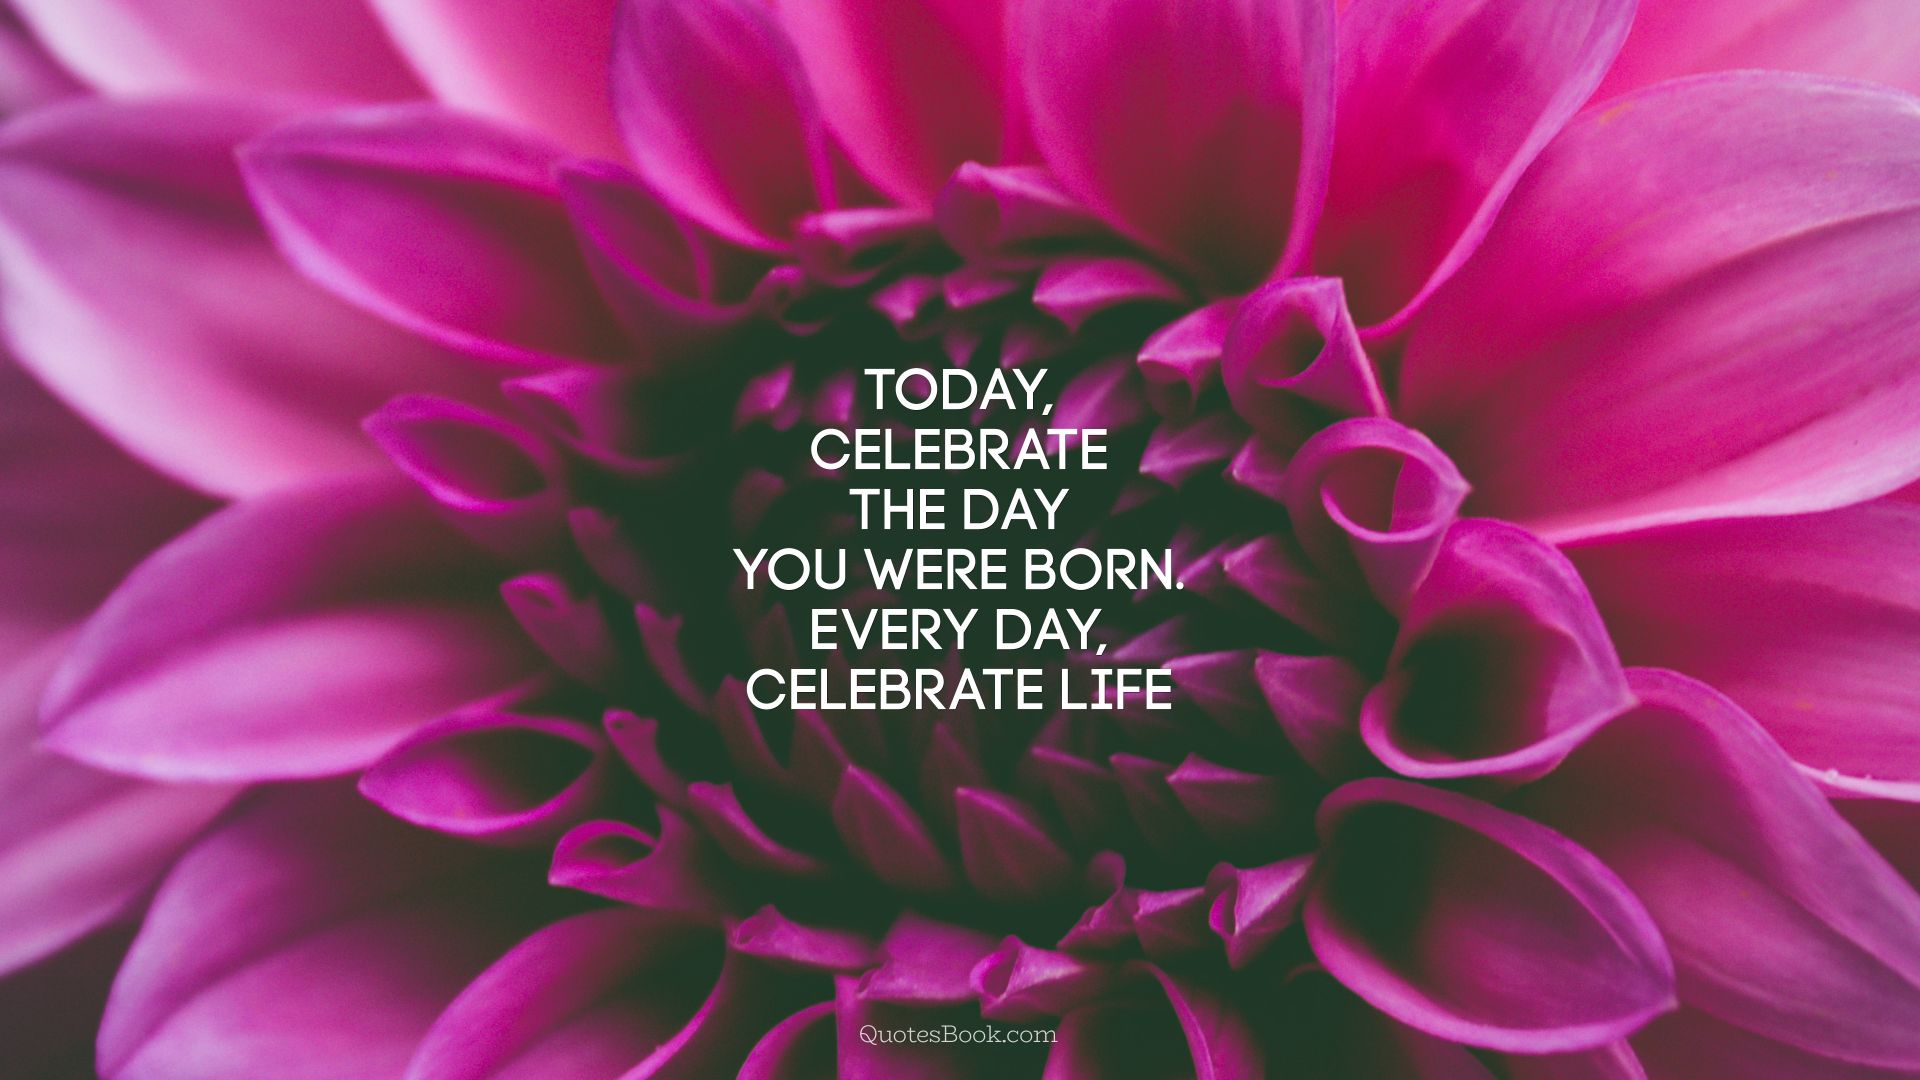 Today, celebrate the day you were born. Every day, celebrate life 